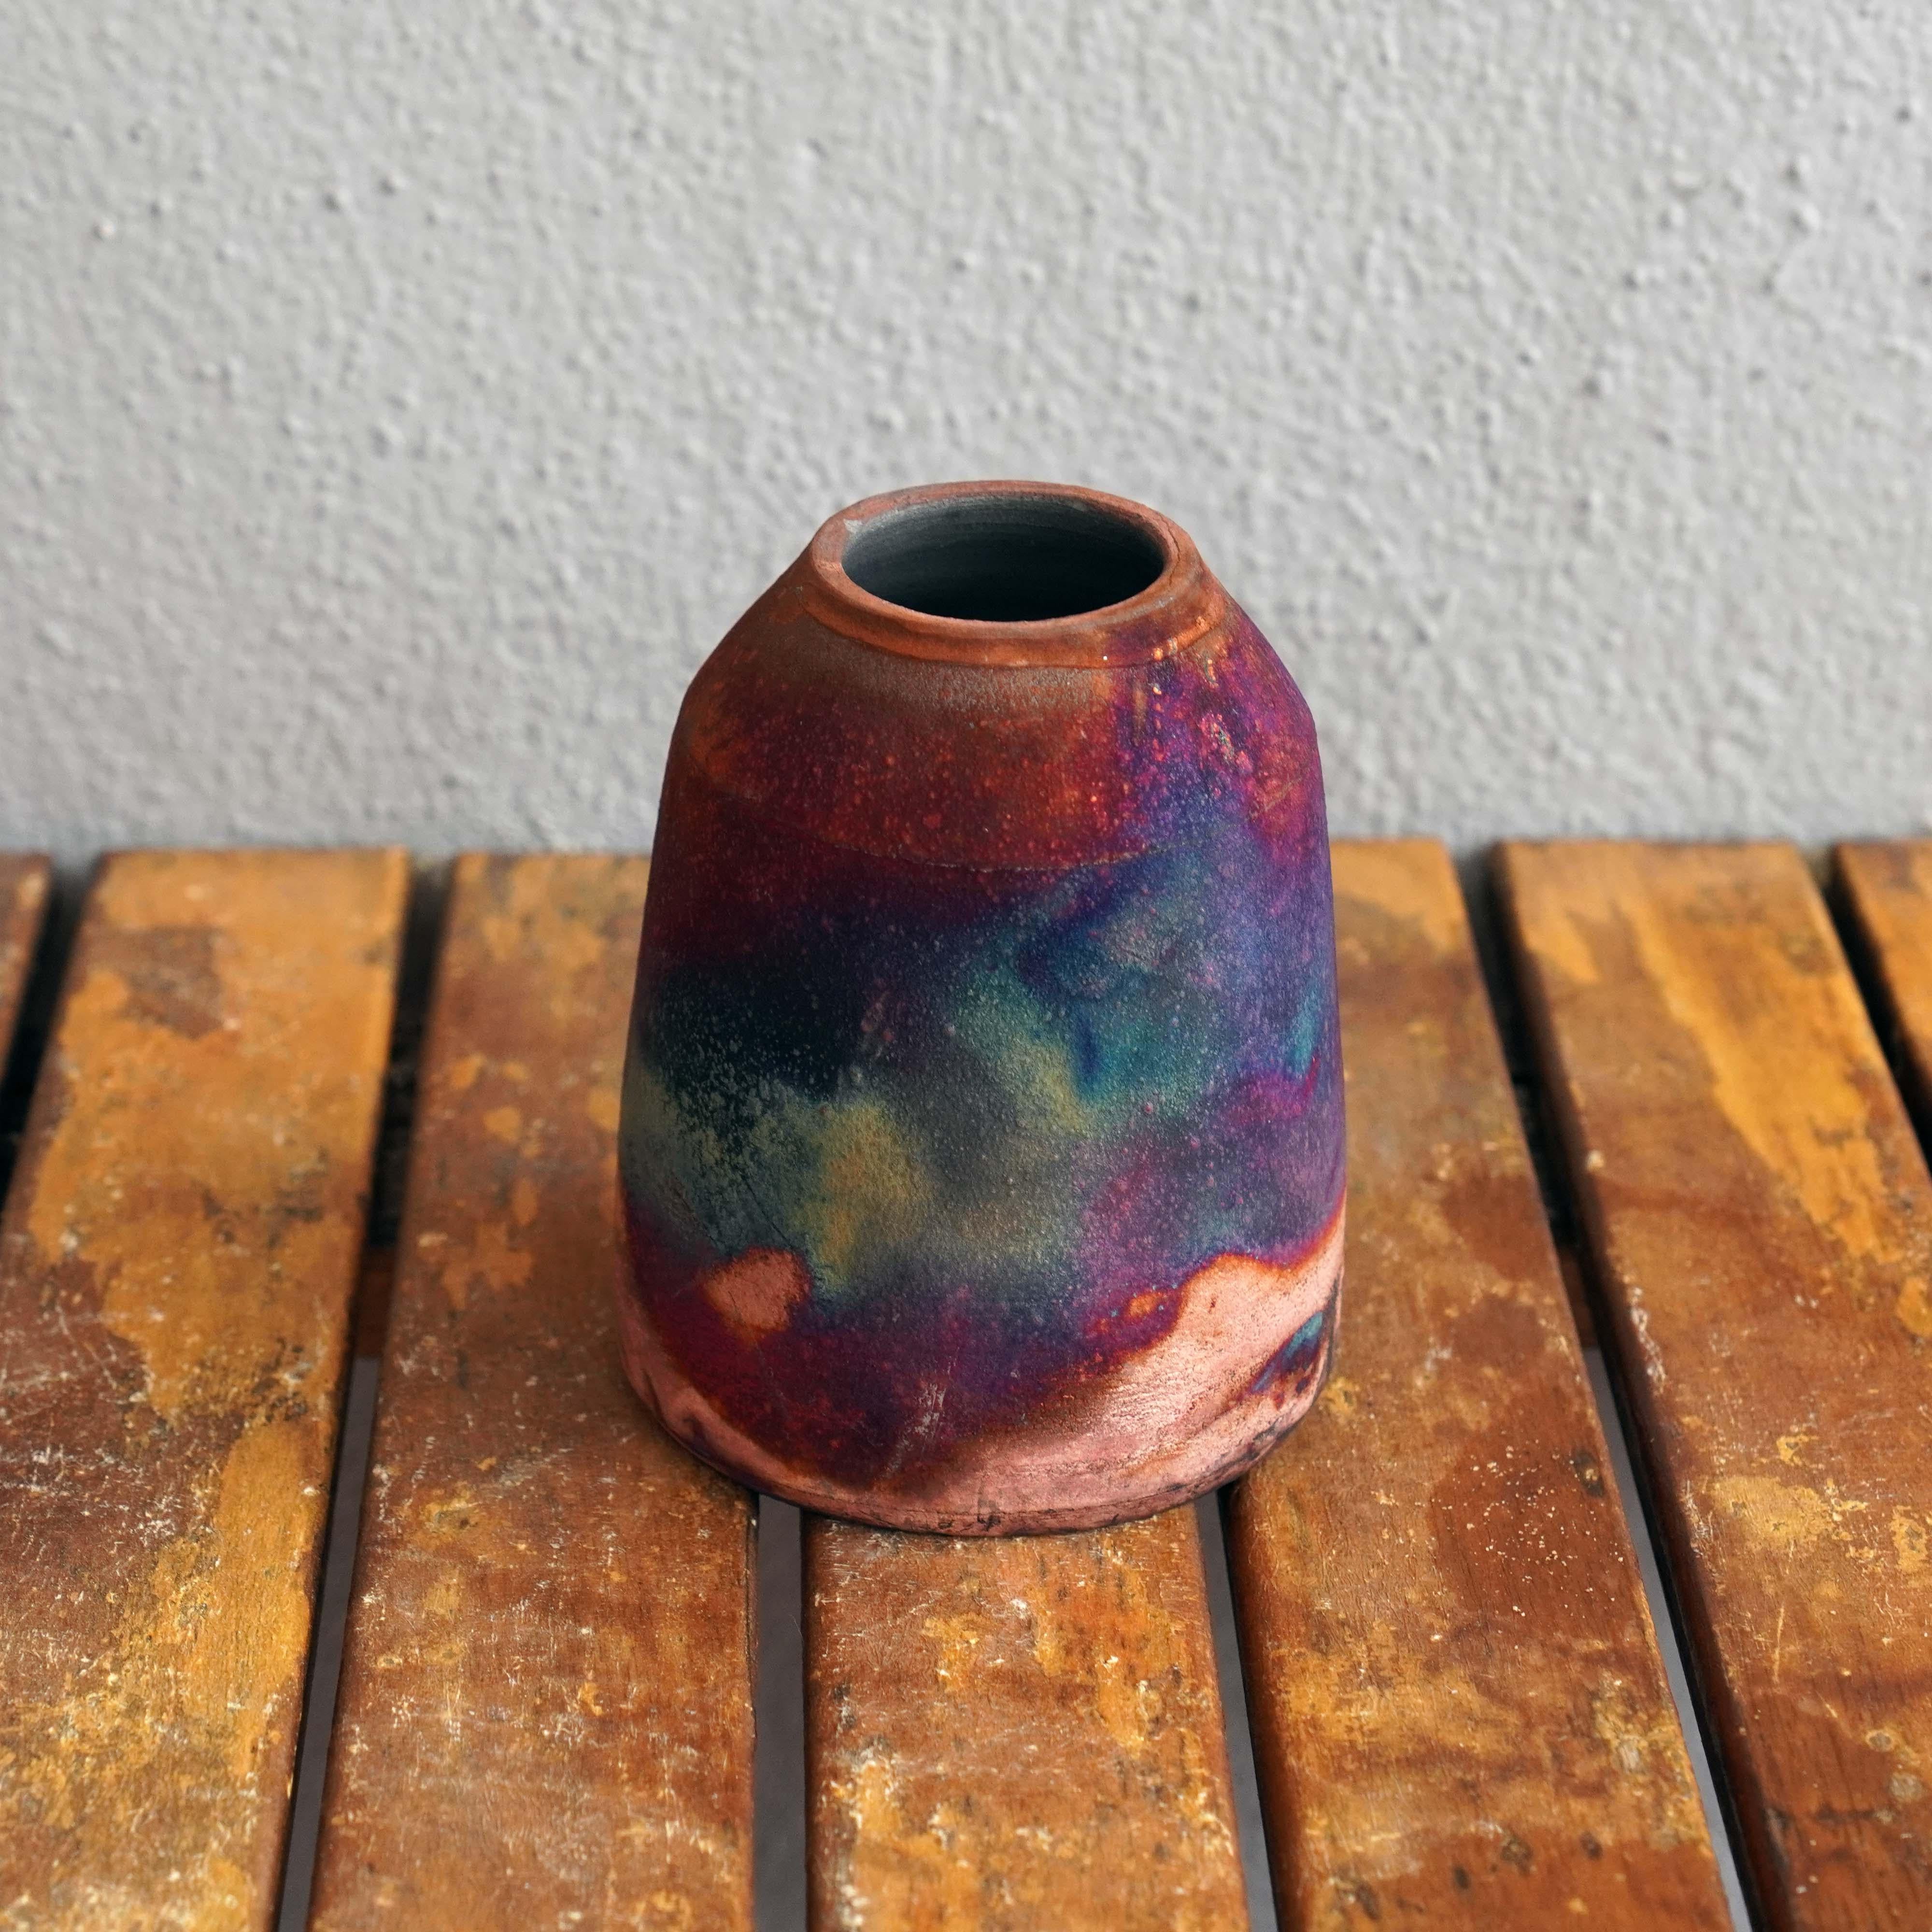 Suzu ( 鈴 ) ~  (n) bell

Our Suzu vase is named after its shape resembling a bell. With a wide base and a narrow mouth, this vase will be a great addition to a modern-style interior space or as part of a set of similar-sized vases.

Material: Clay,